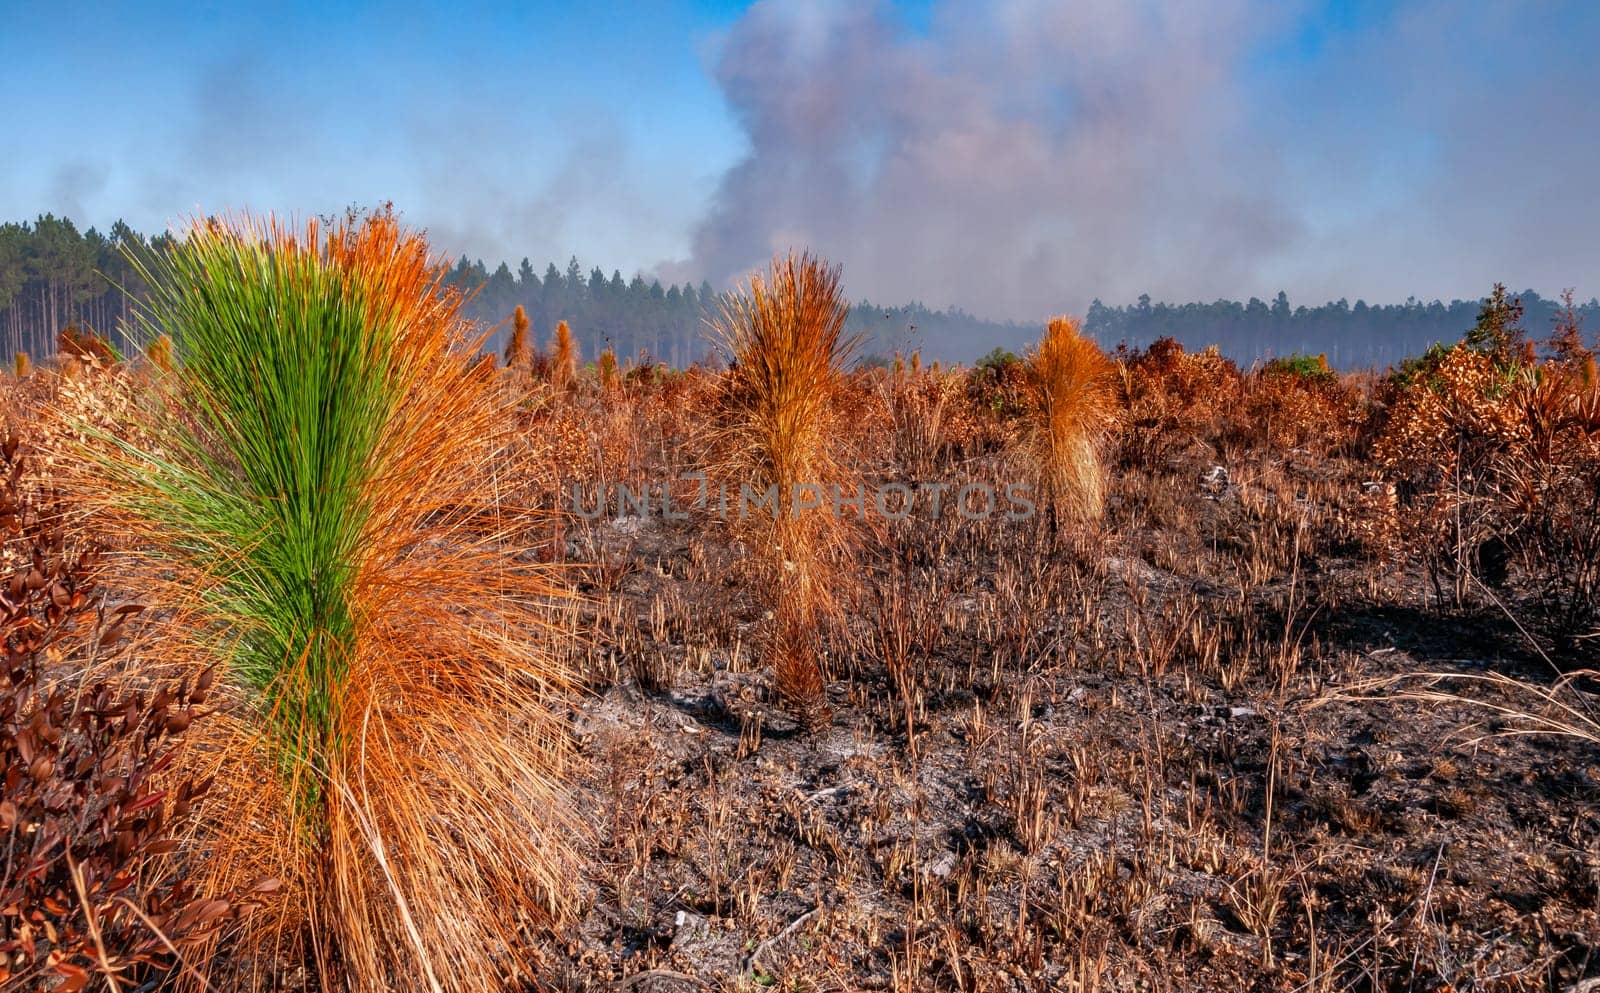 Wildland fires, Burnt field with tree plantings and palm trees, Florida